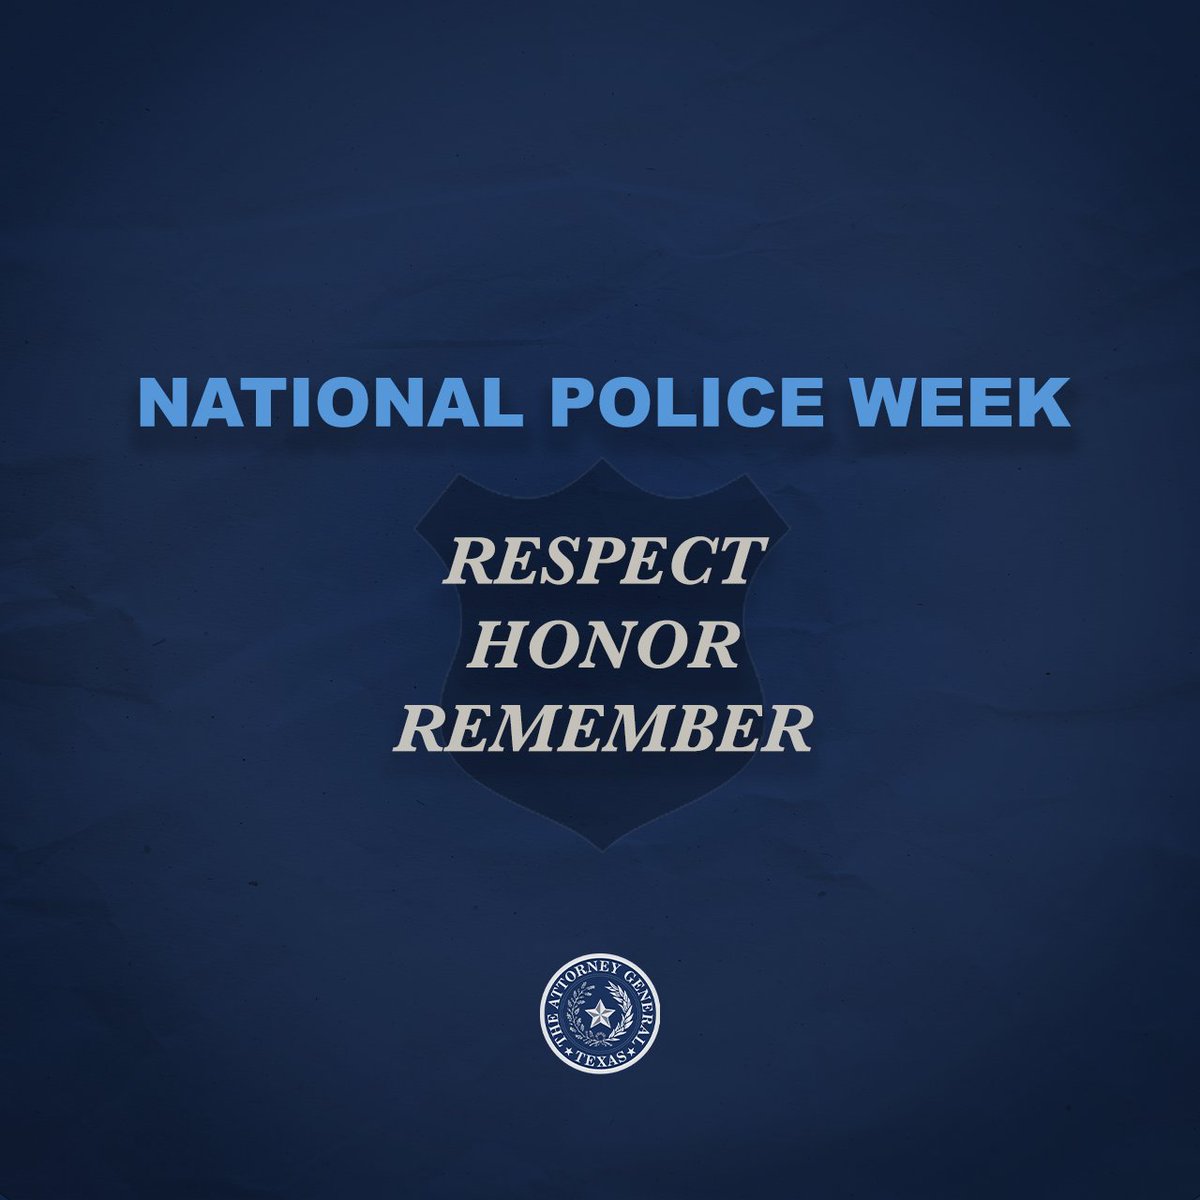 This week, the OAG is honoring all law enforcement officers who courageously gave their lives while serving the people of Texas.